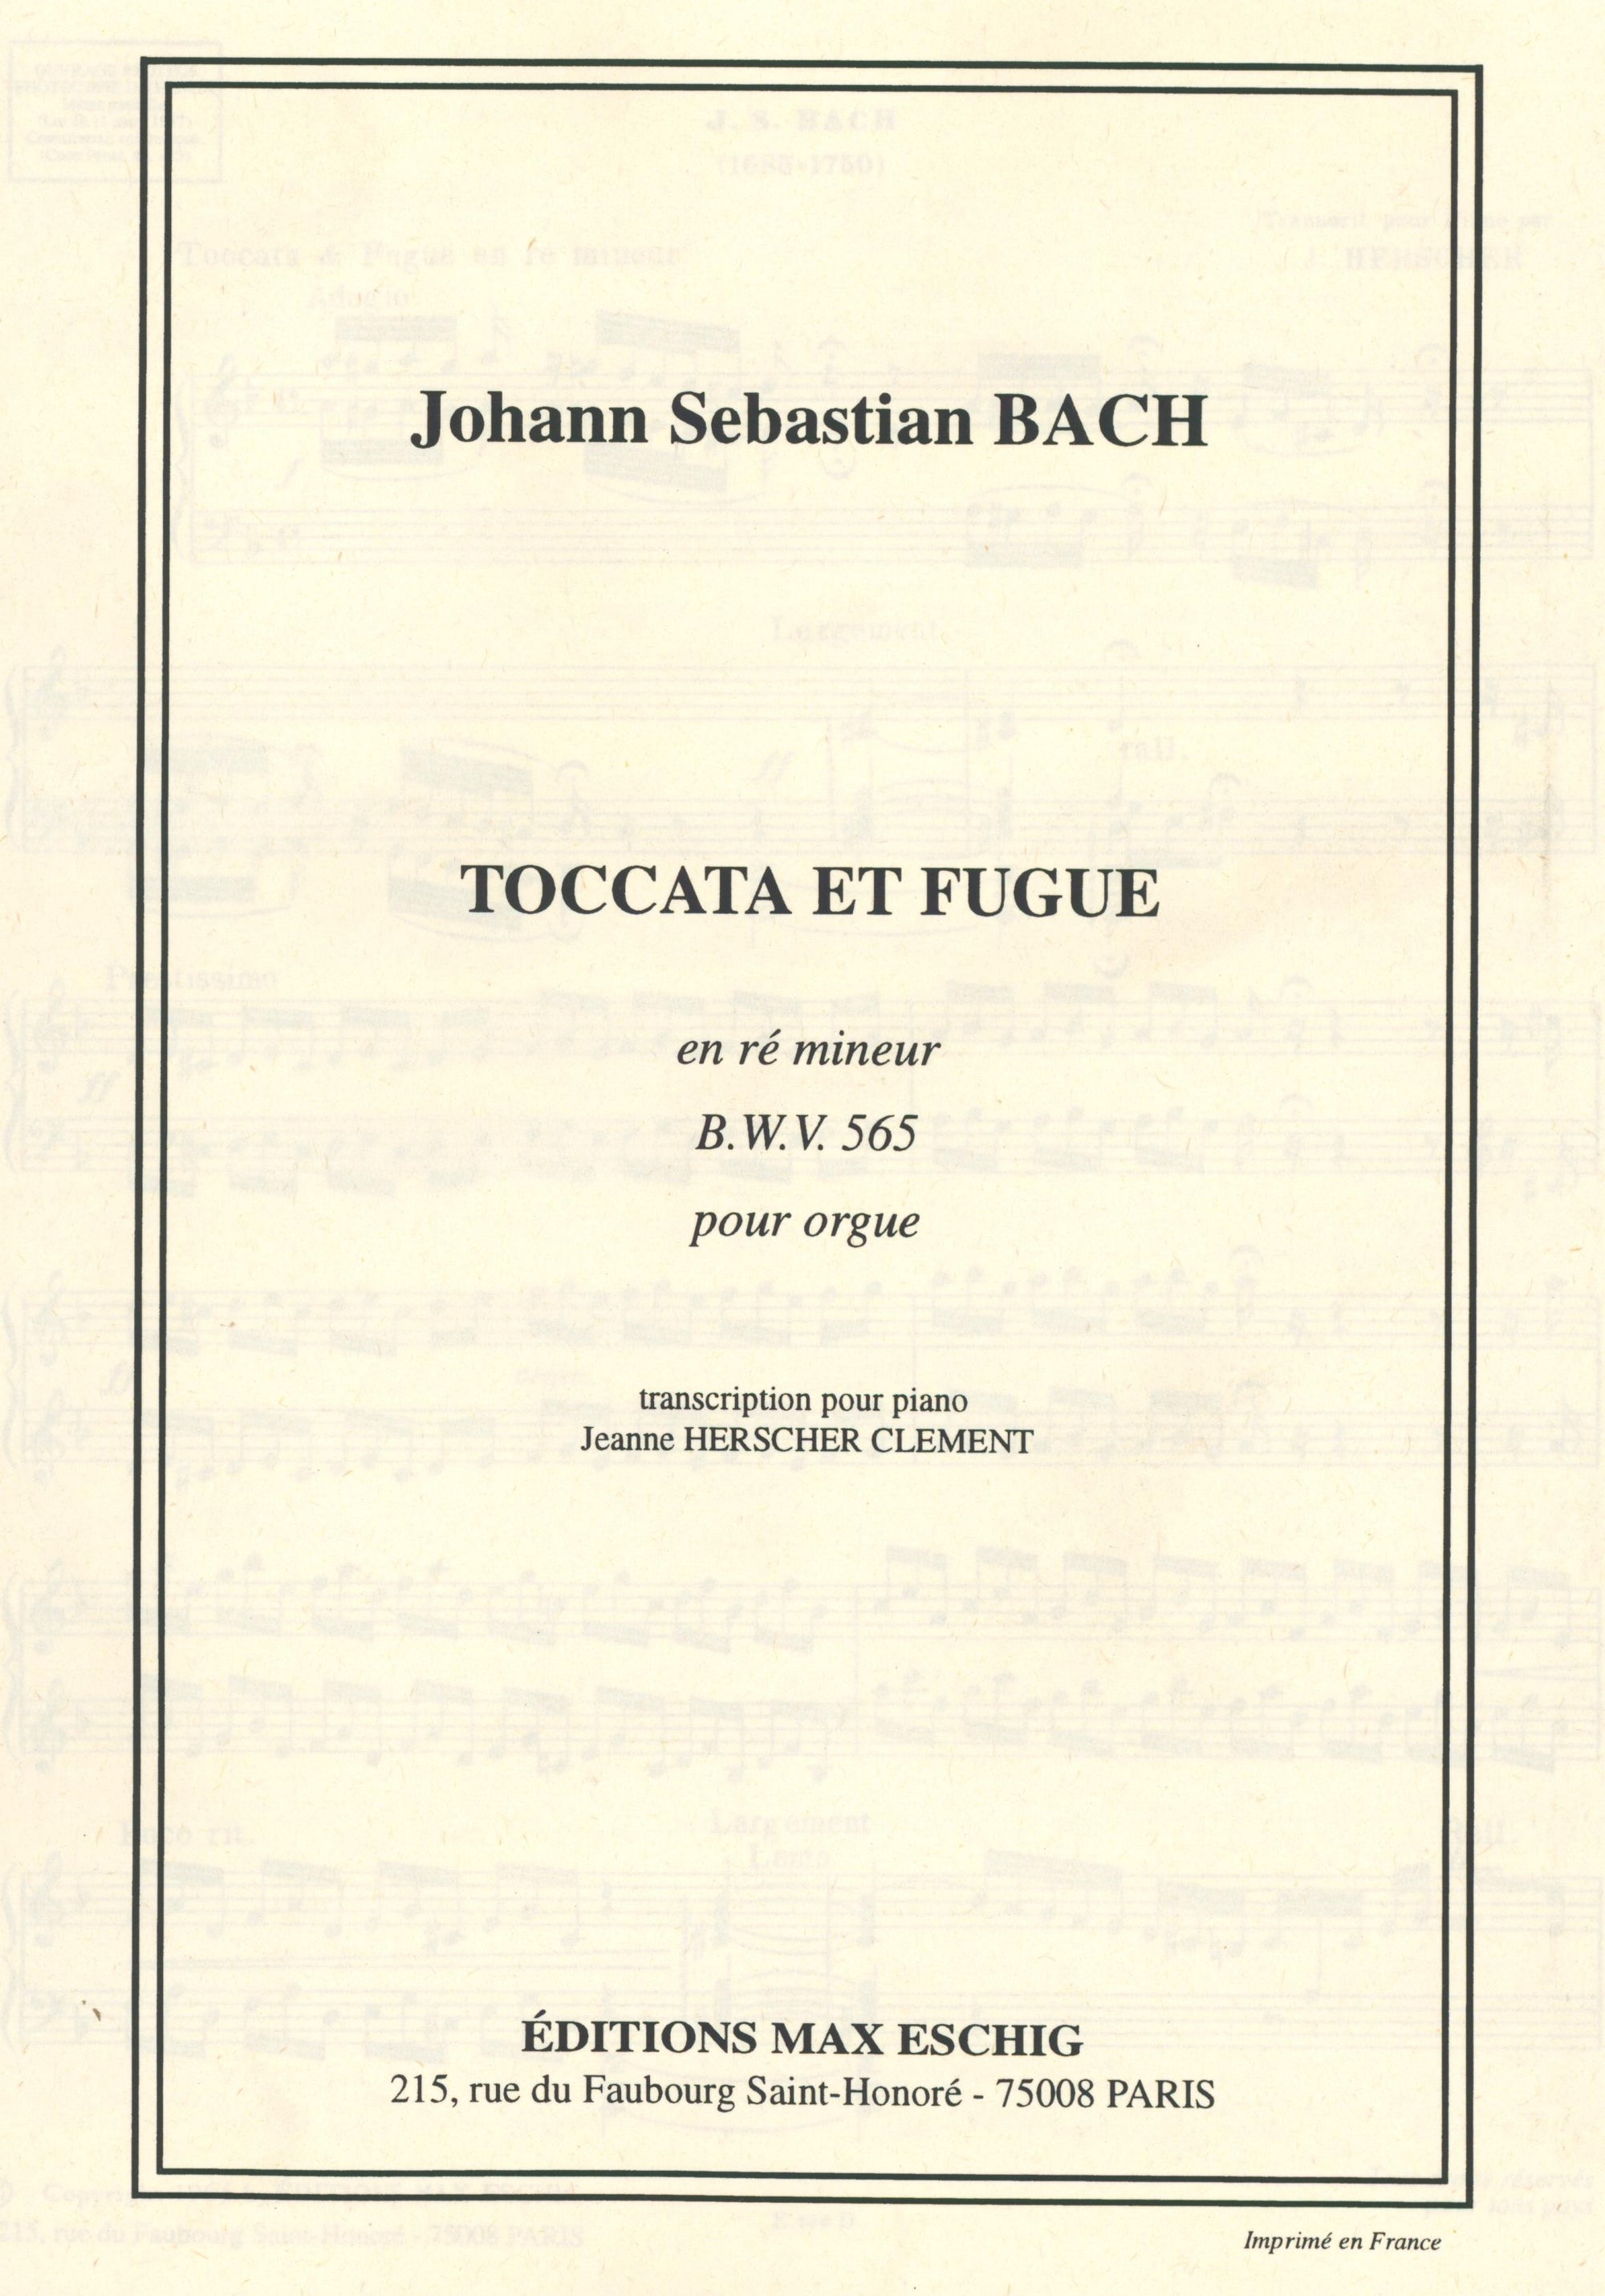 Bach Toccata and Fugue in D Minor, BWV 565 (arr. for piano)